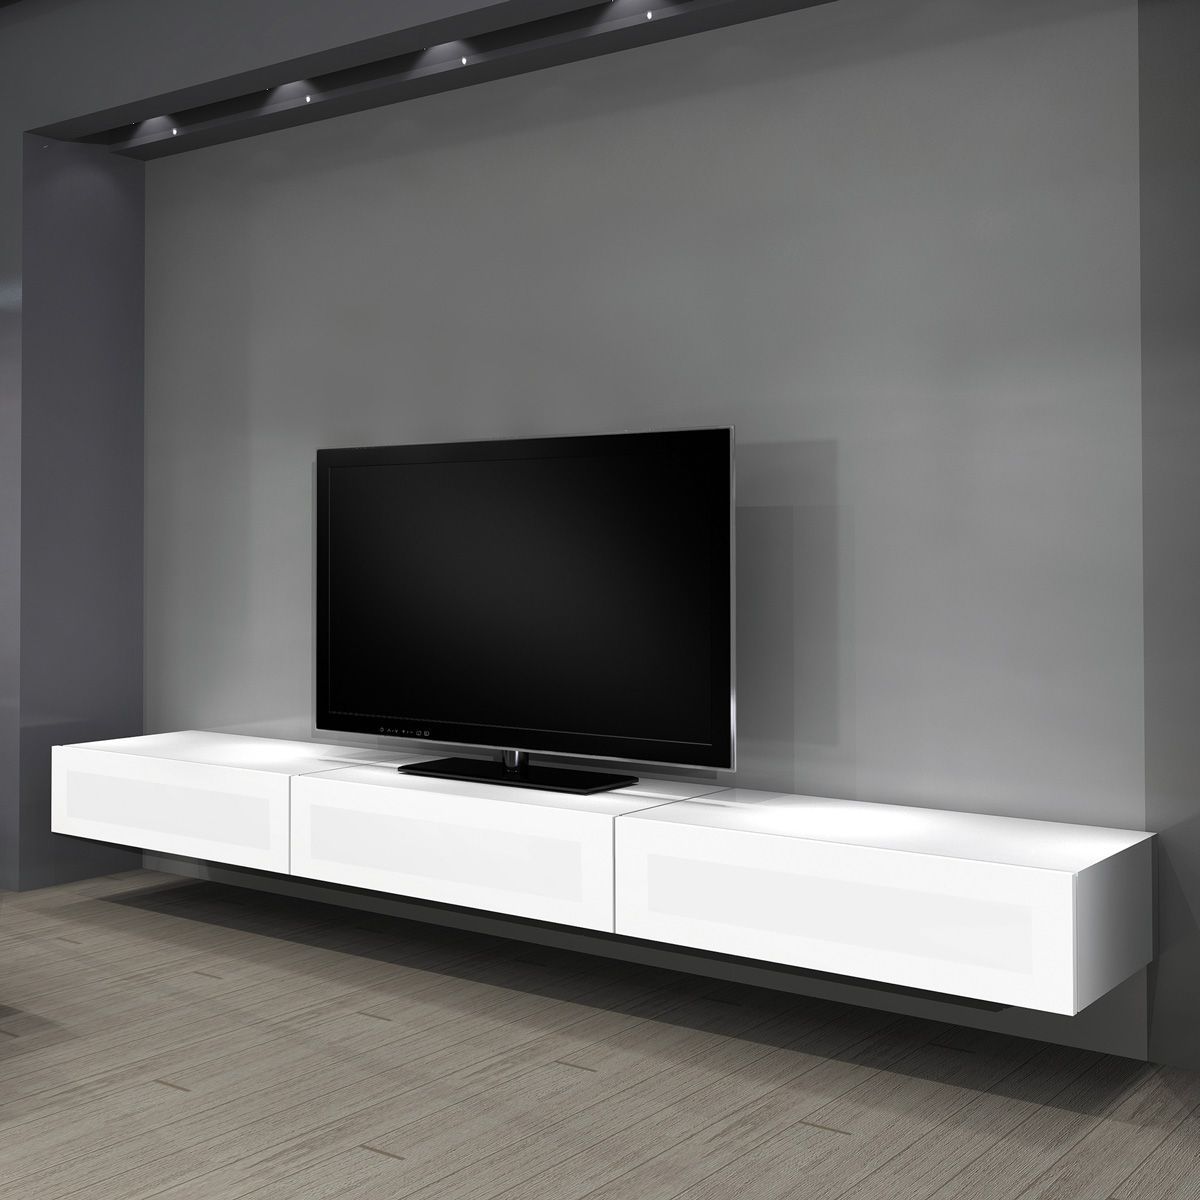 Featured Photo of 20 Best Ideas Floating Tv Cabinets